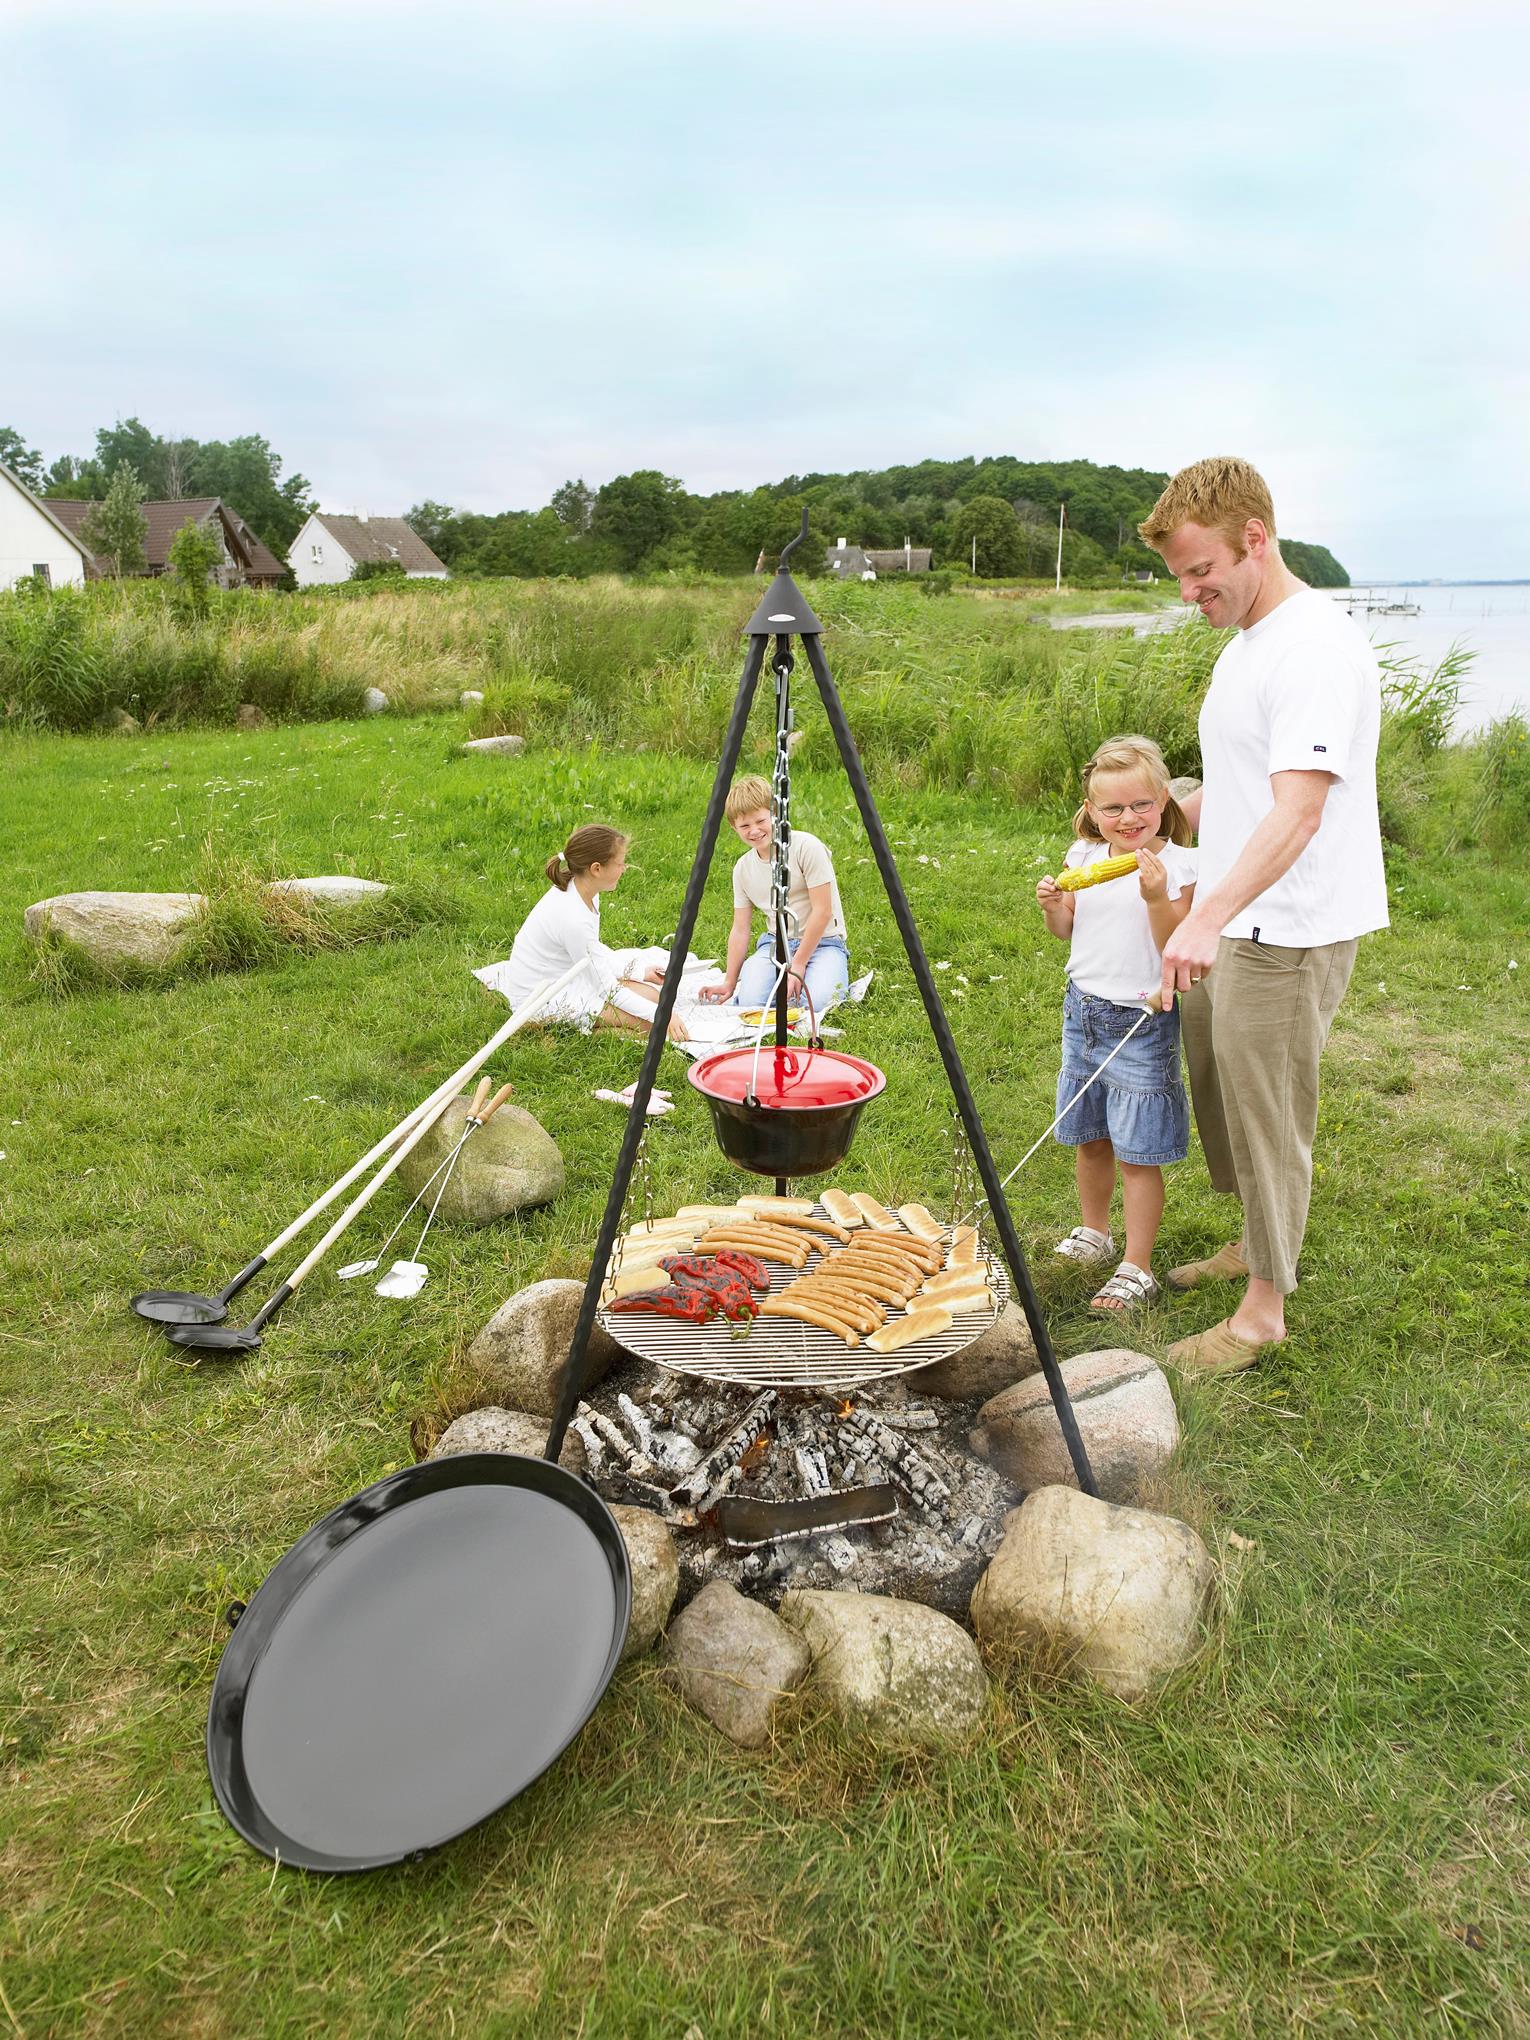 Bon-fire is for both children and grown-ups! Here Bon-fire Tripod with Grill grid, Stew pot and BBQ pan. On the side Pancake pans and mathing grill tools.